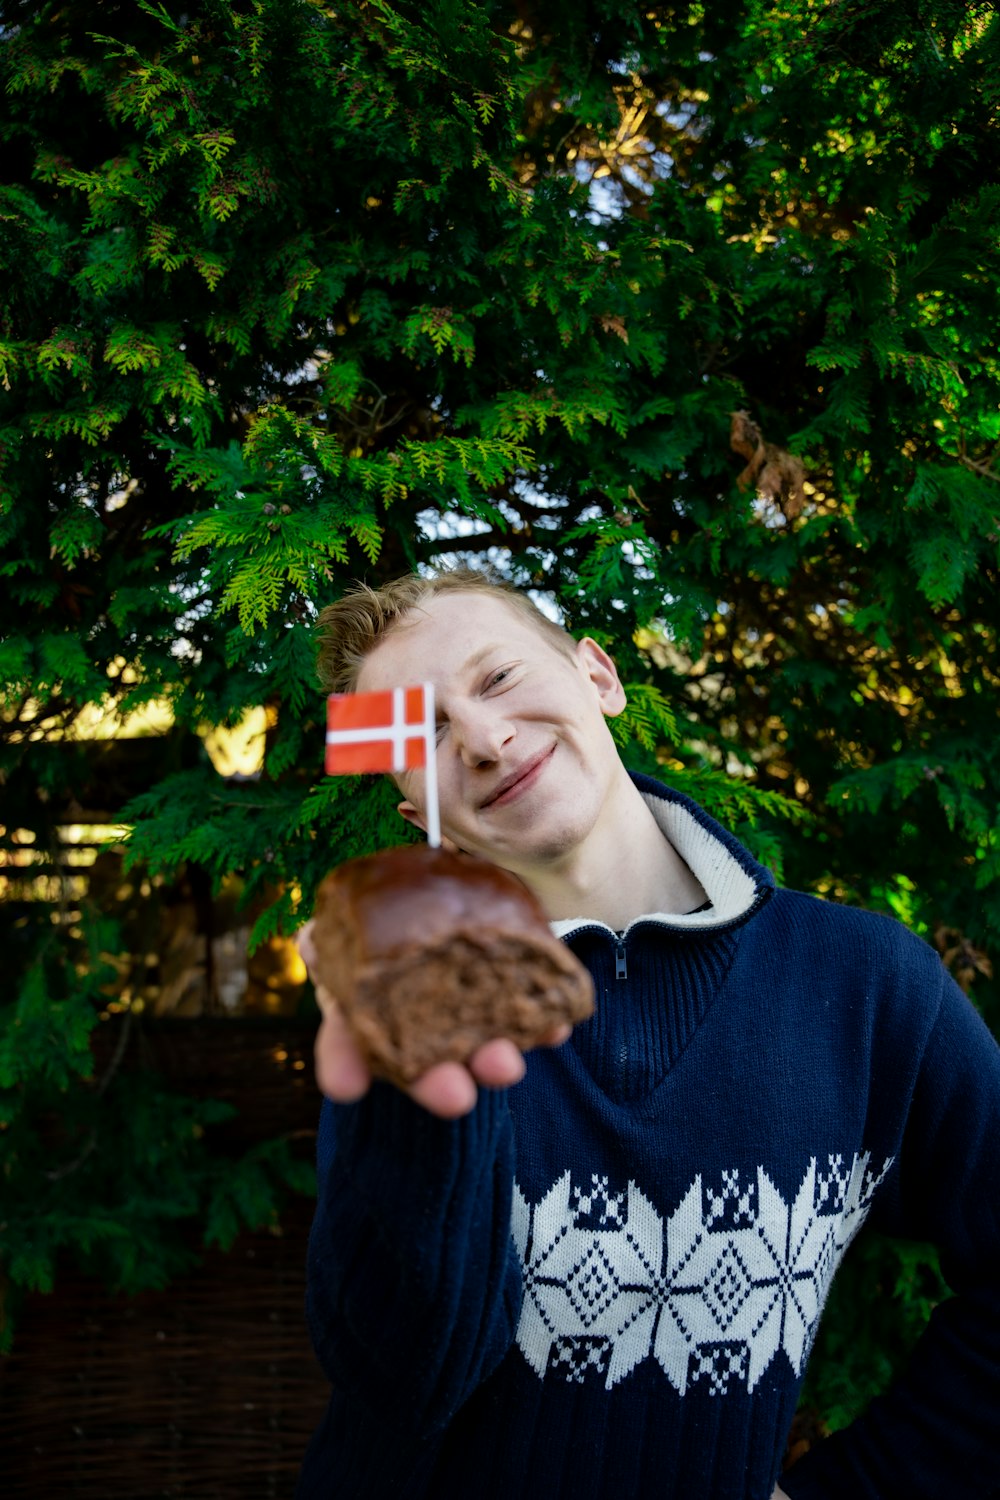 a young man holding a donut with a flag on it